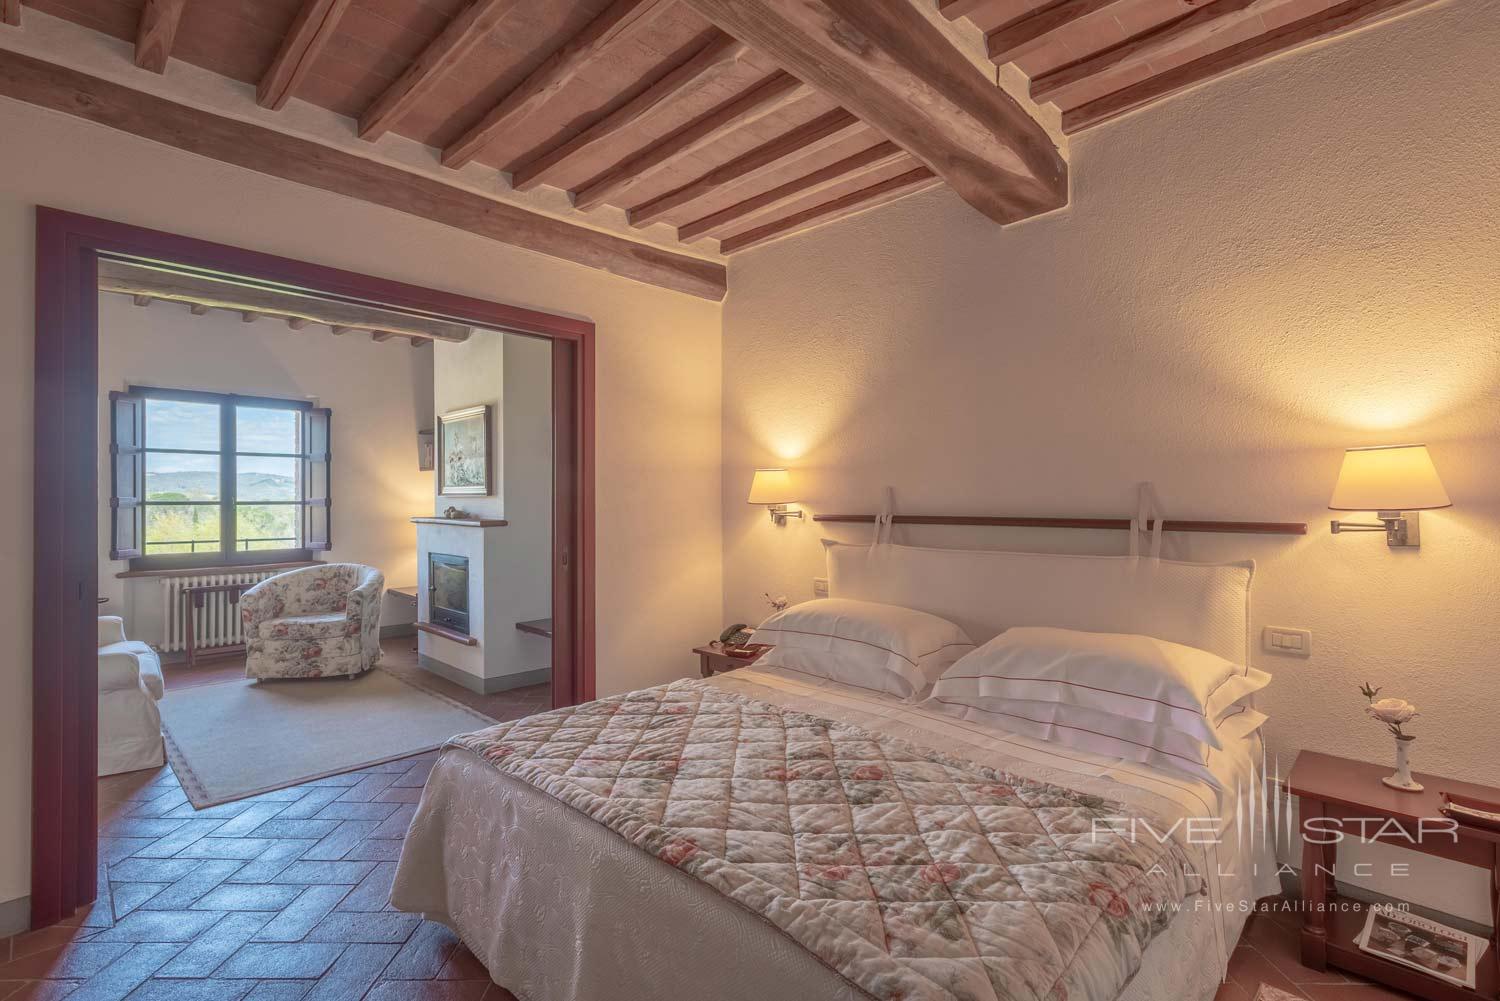 Deluxe Guest Room at Hotel Le Fontanelle, Italy